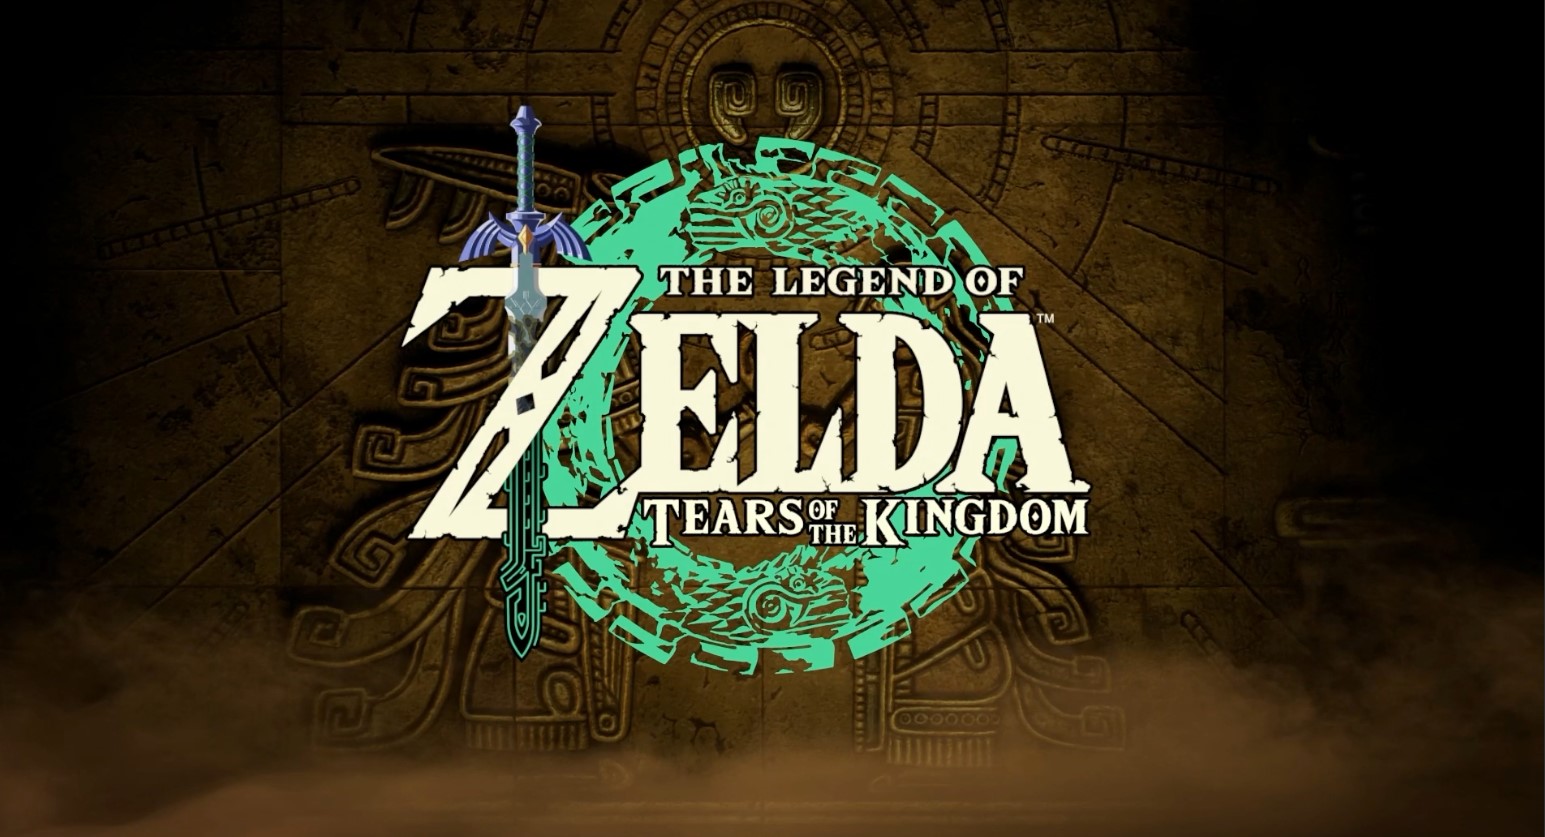 Zelda: BoTW’s sequel is officially releasing in May 2023 as ‘Tears of the Kingdom’ | VGC